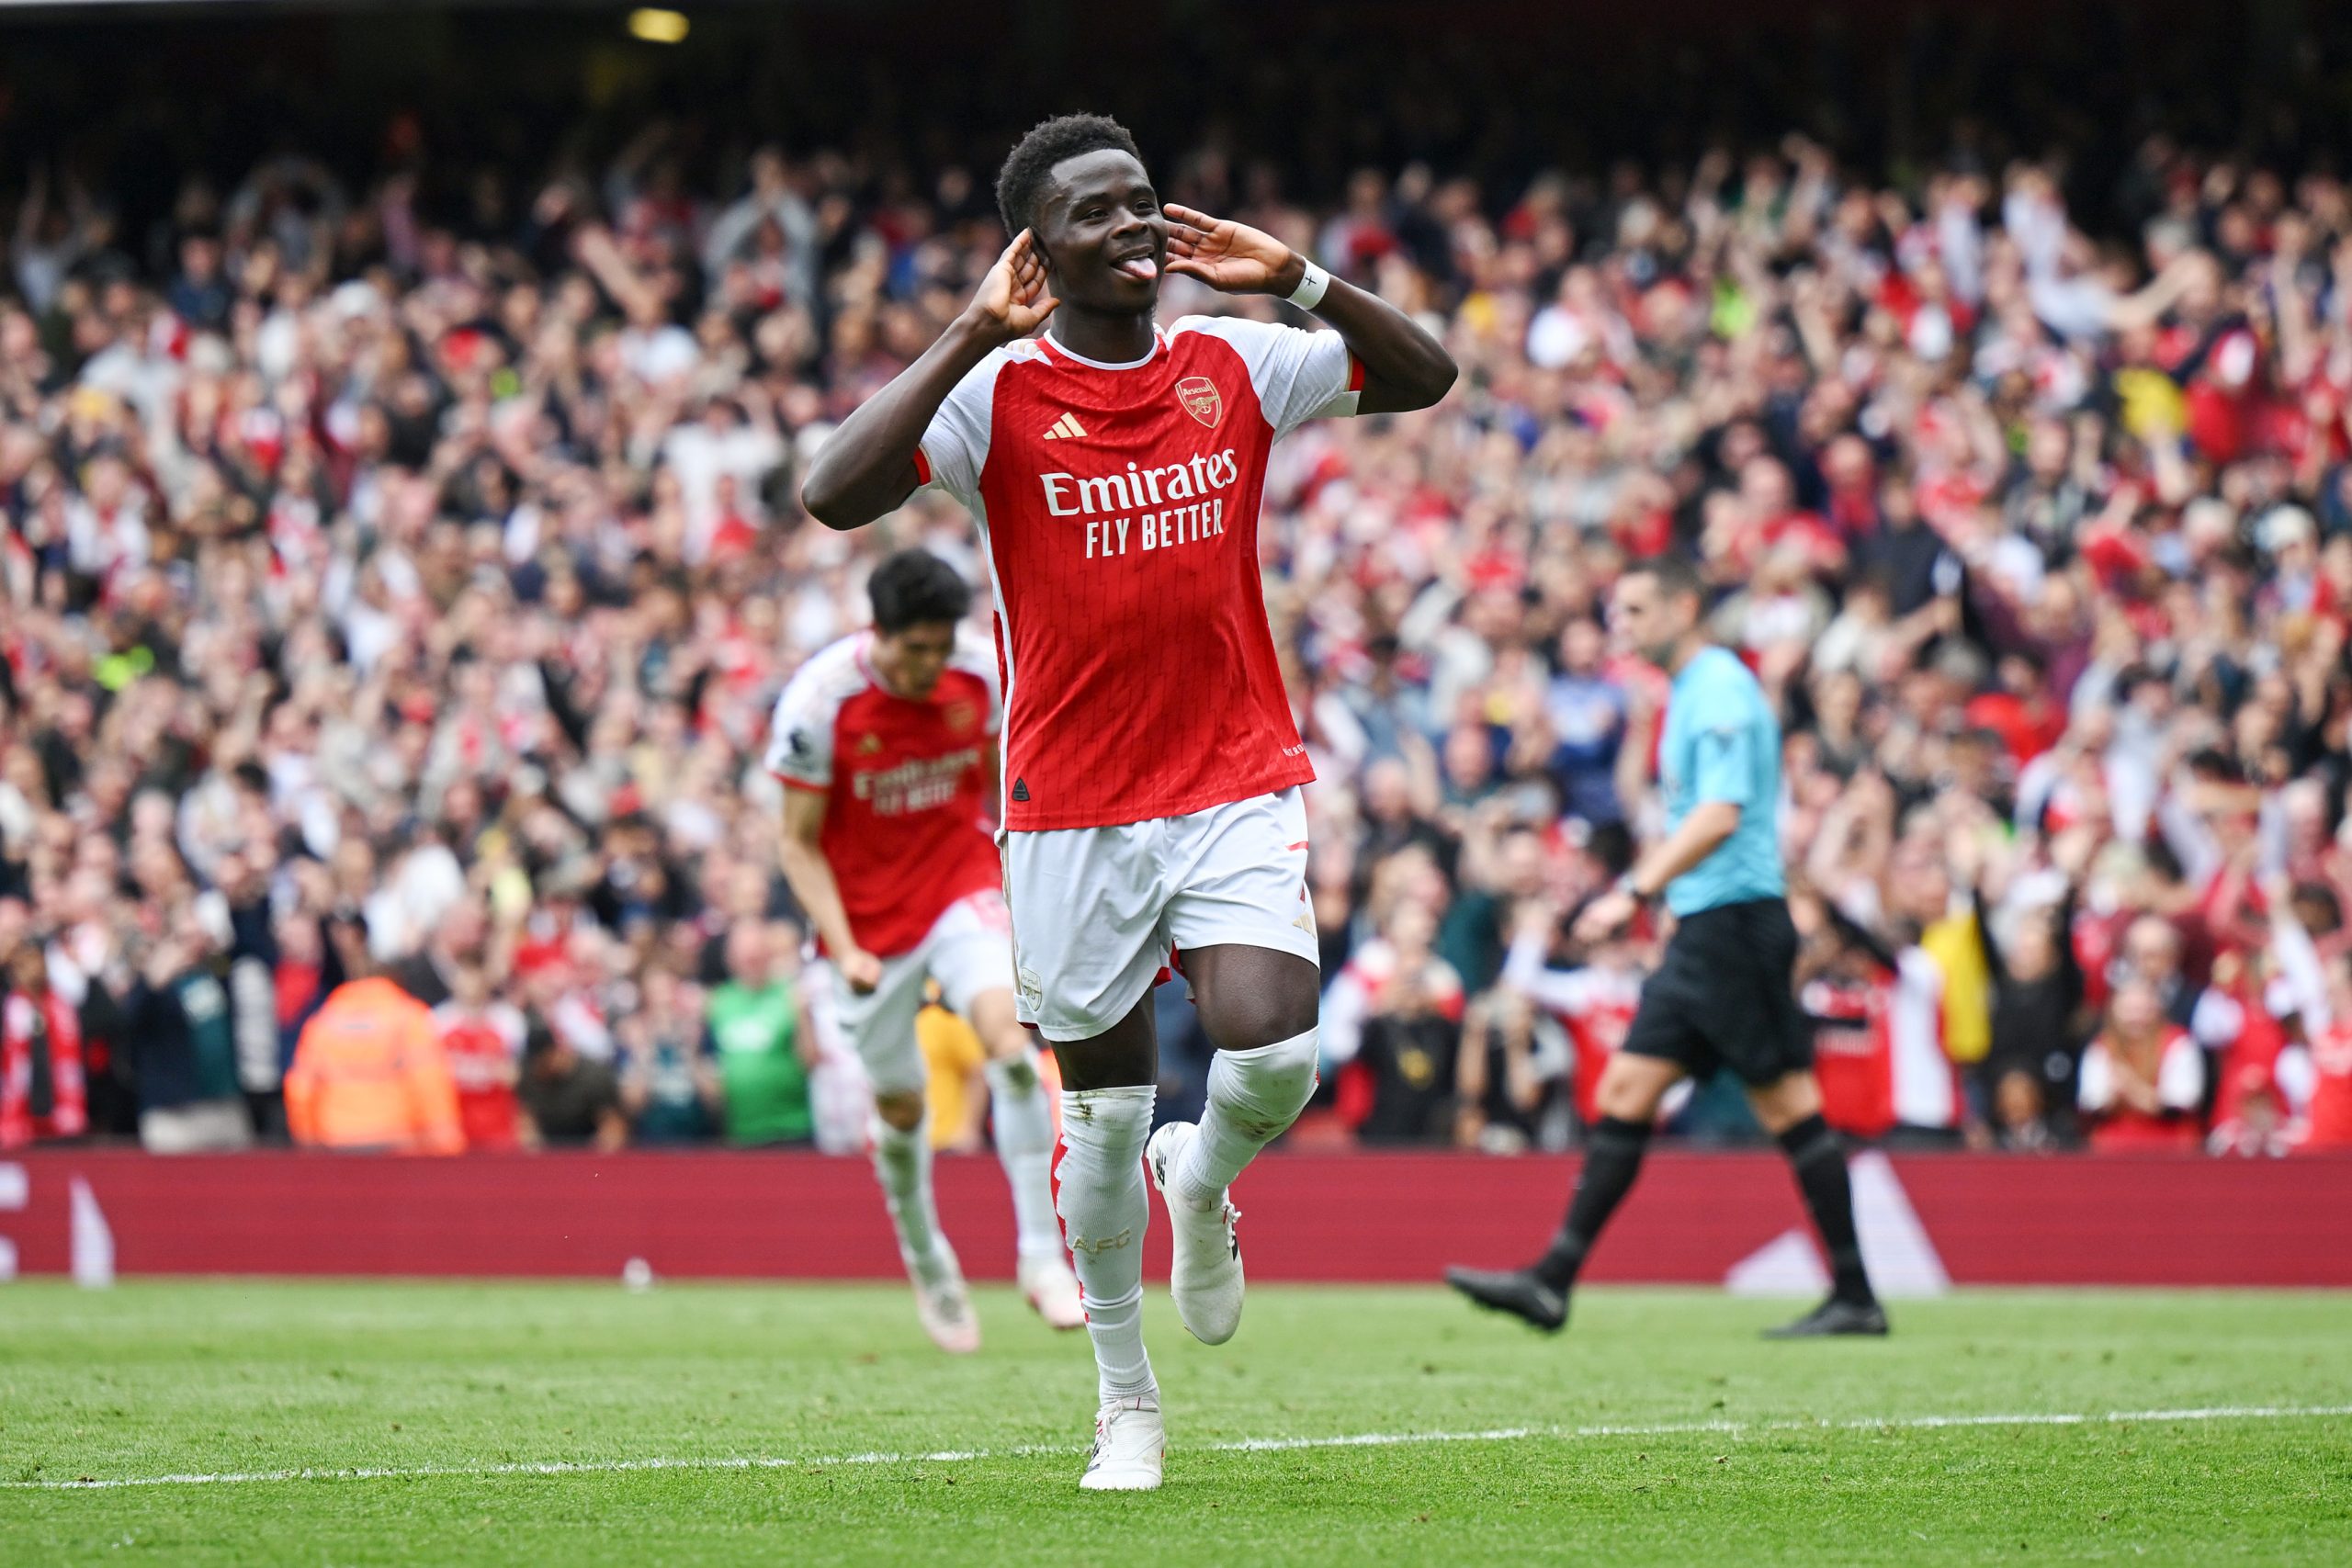 Arsenal keeps top spot in EPL, scoring three goals past Bournemouth 9